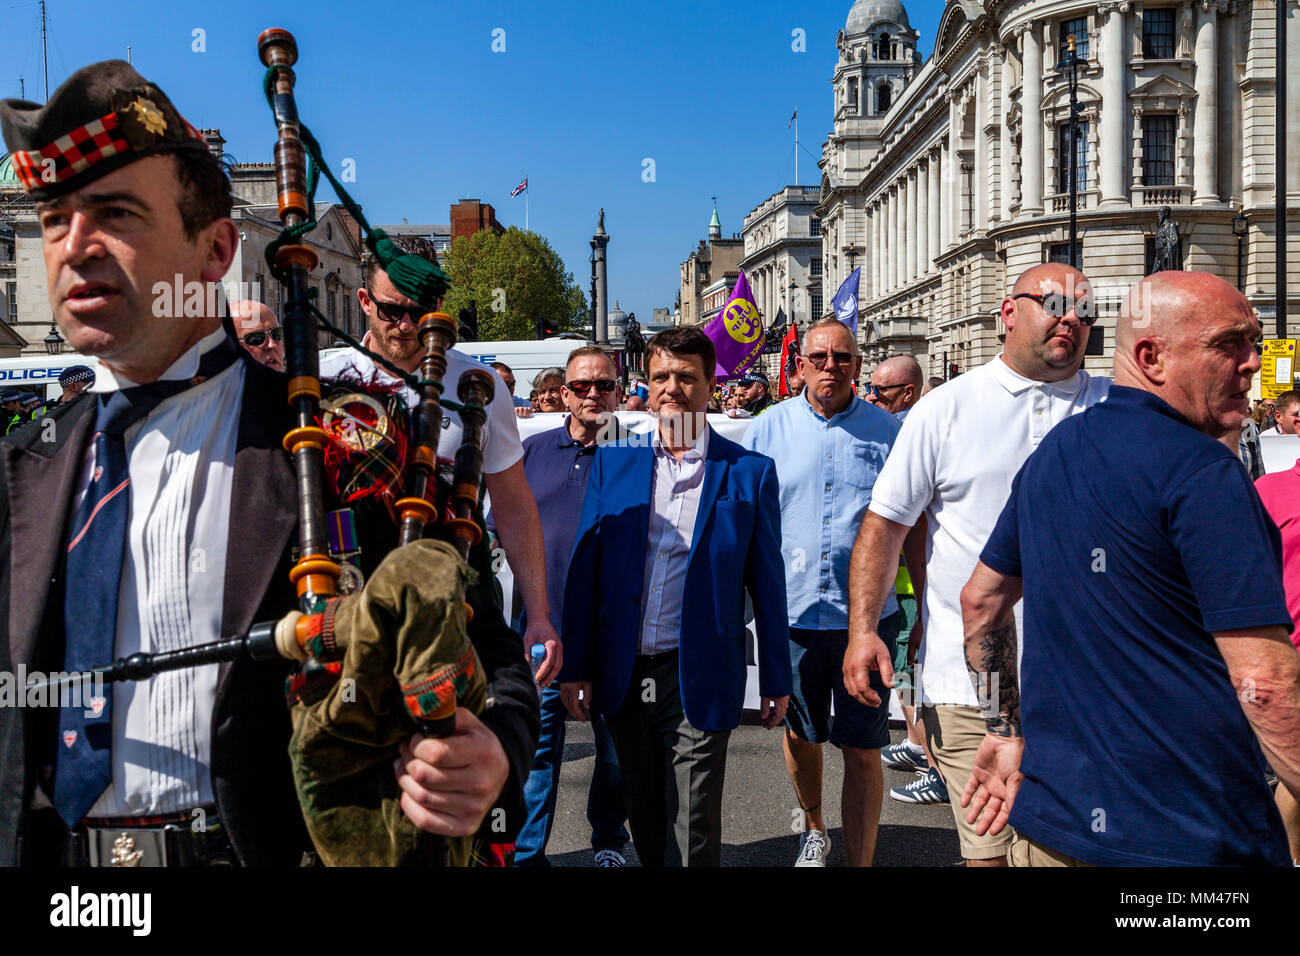 New UKIP leader Gerard Batten takes part in a march from Hyde Park to Whitehall to attend a freedom of speech rally, London, UK Stock Photo